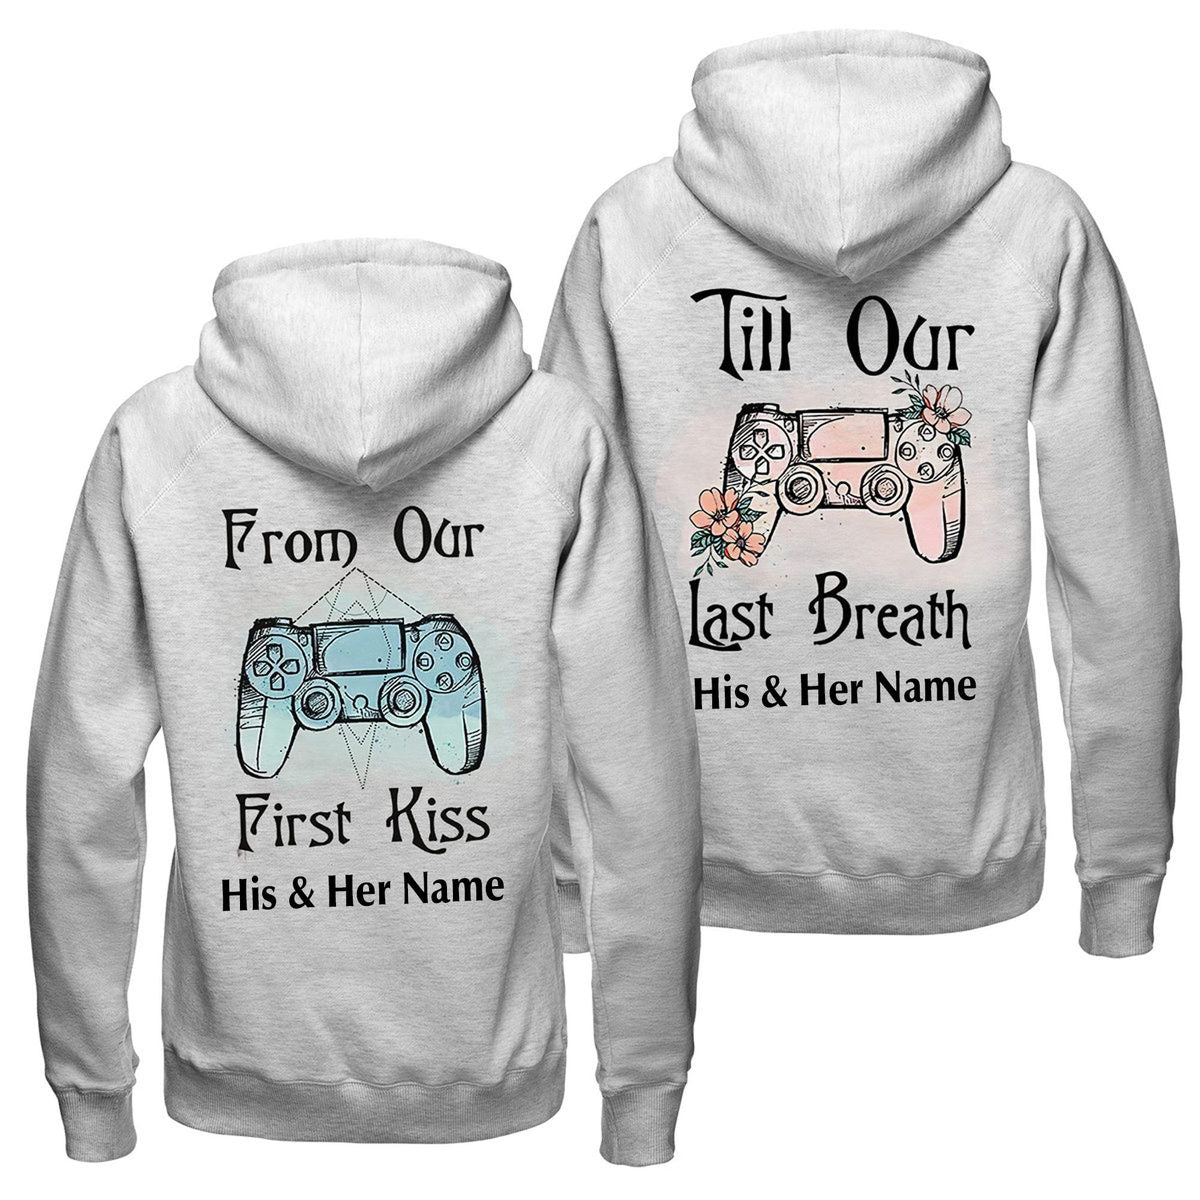 Personalized From Our First Kiss Till Our Last Breath Hoodie, Custom Couple Gamer Hoodie, Couple Valentine Hoodie, Funny Gaming Hoodies